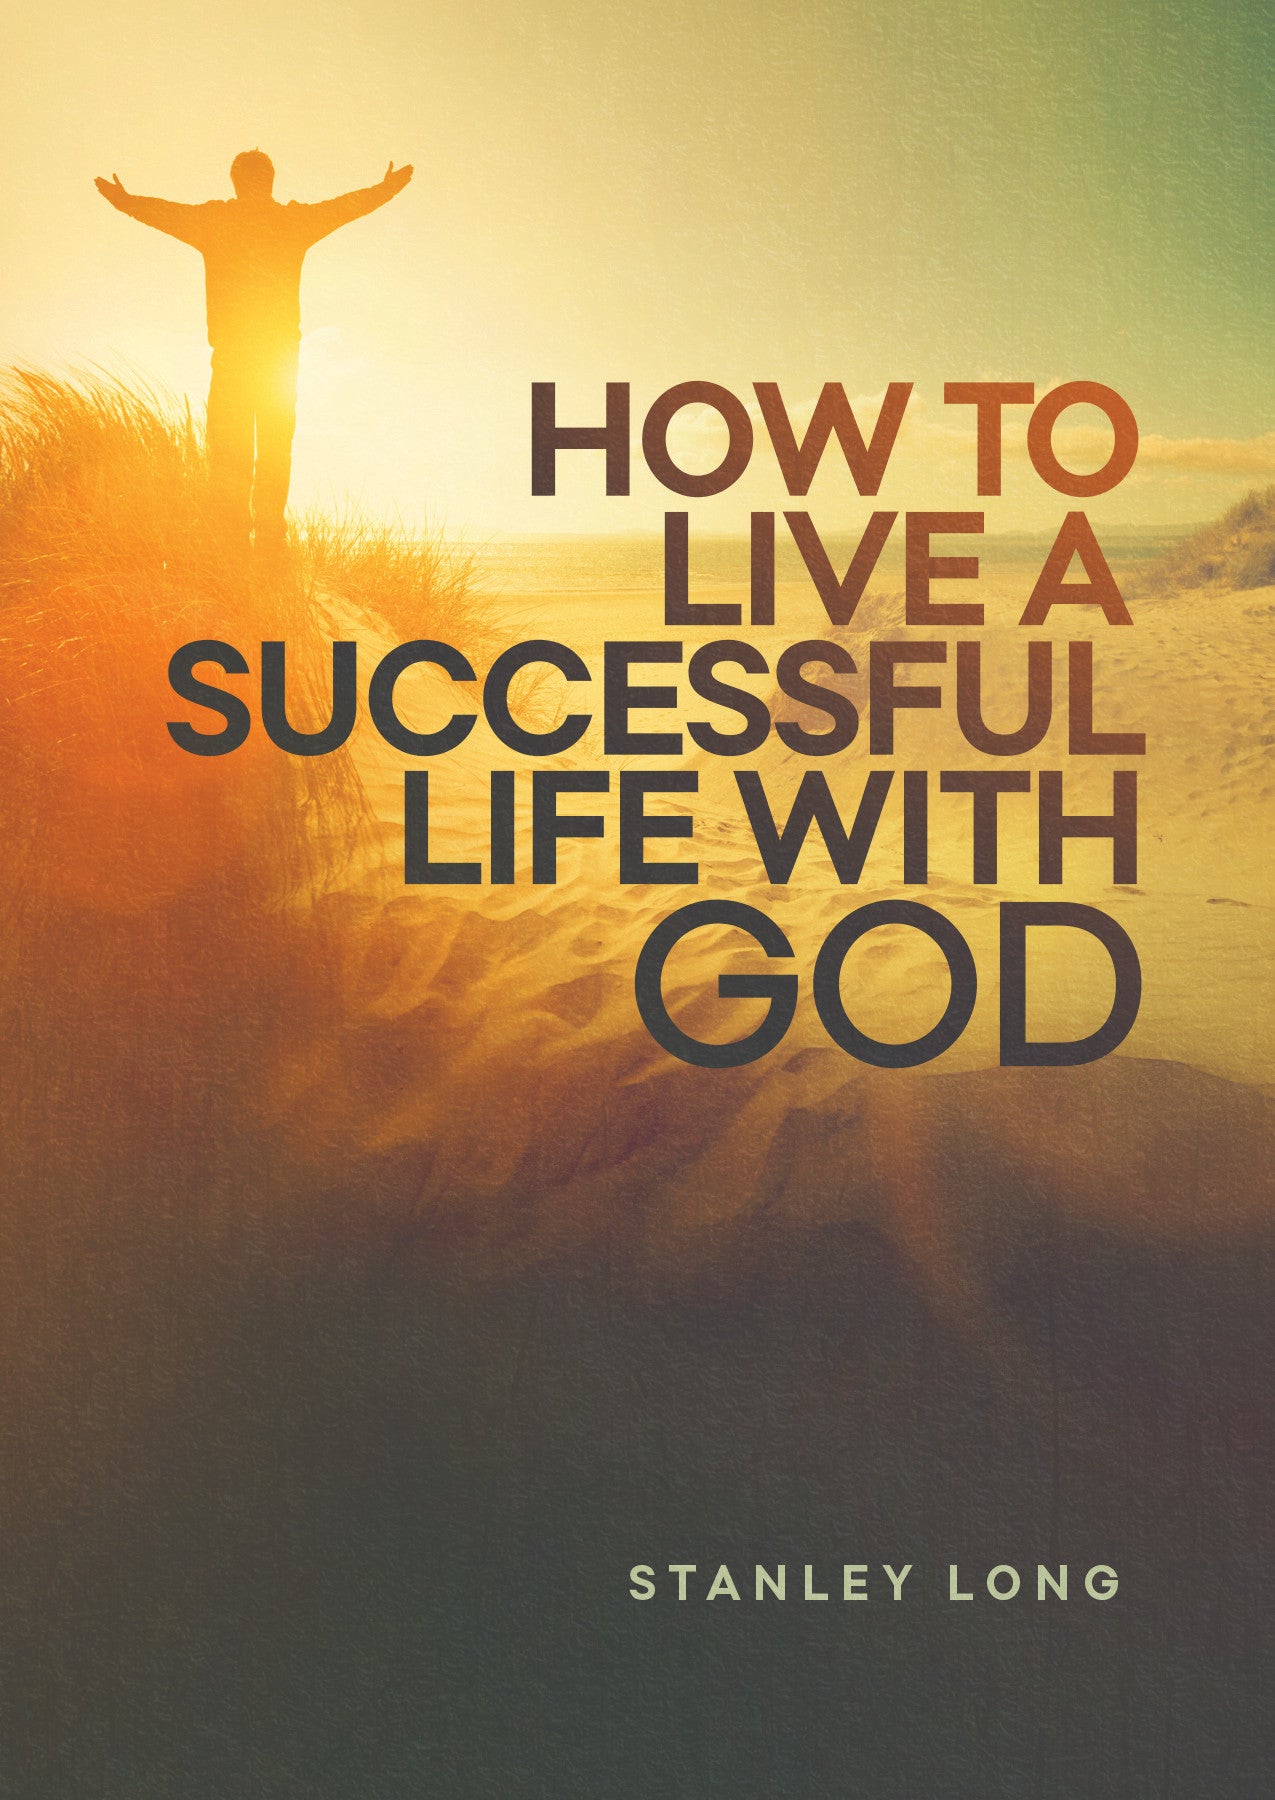 How to Live a Successful Life with God